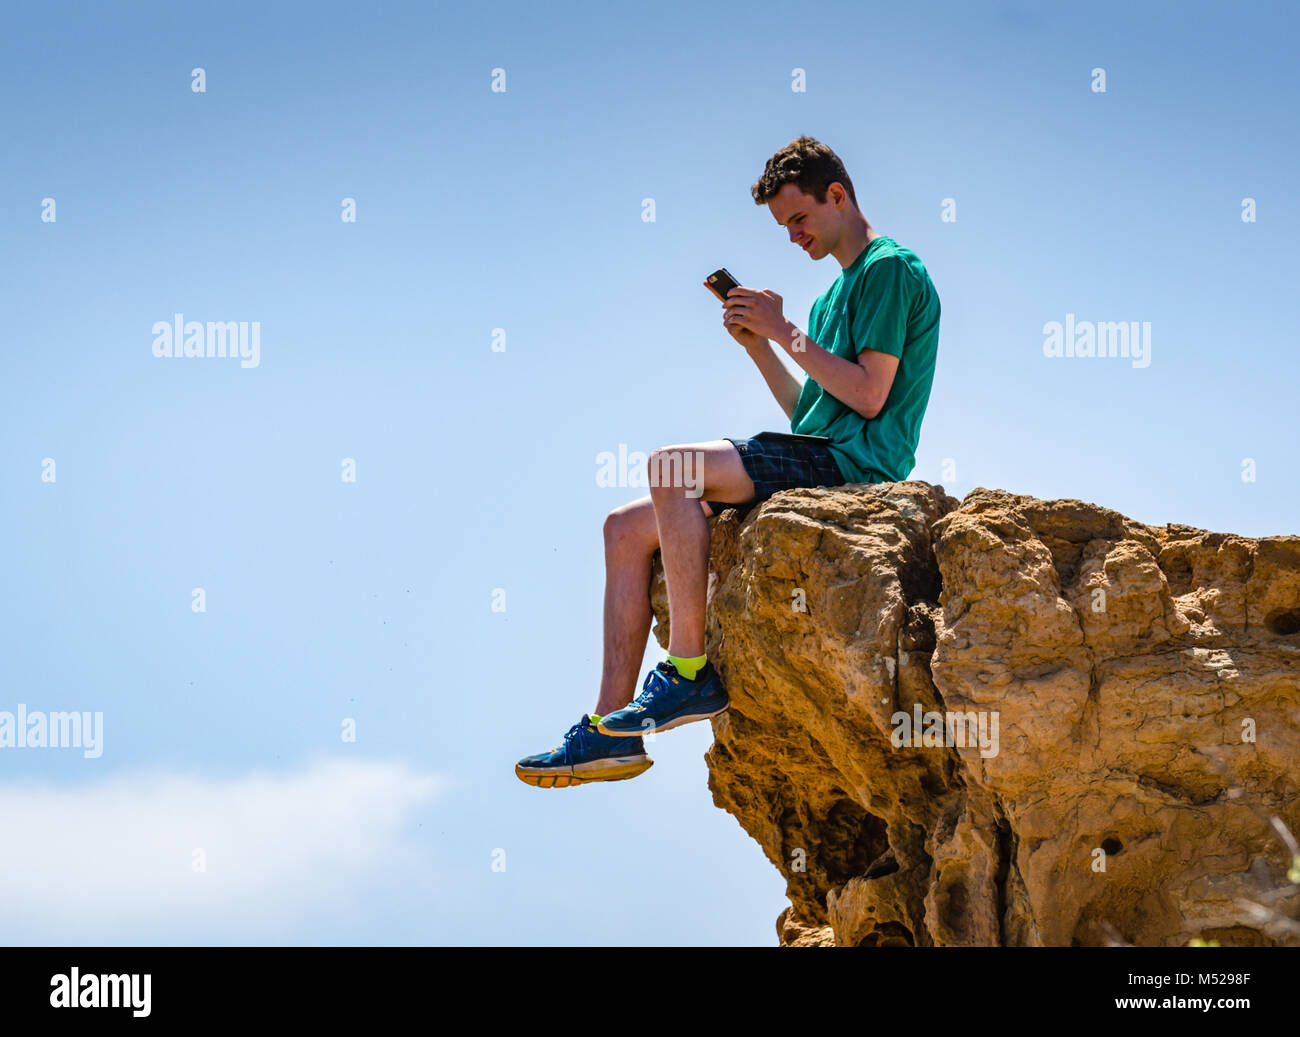 Teen boy sitting on a cliff and reading smartphone in Torrey Pines State Natural Preserve near San Diego, CA. Stock Photo